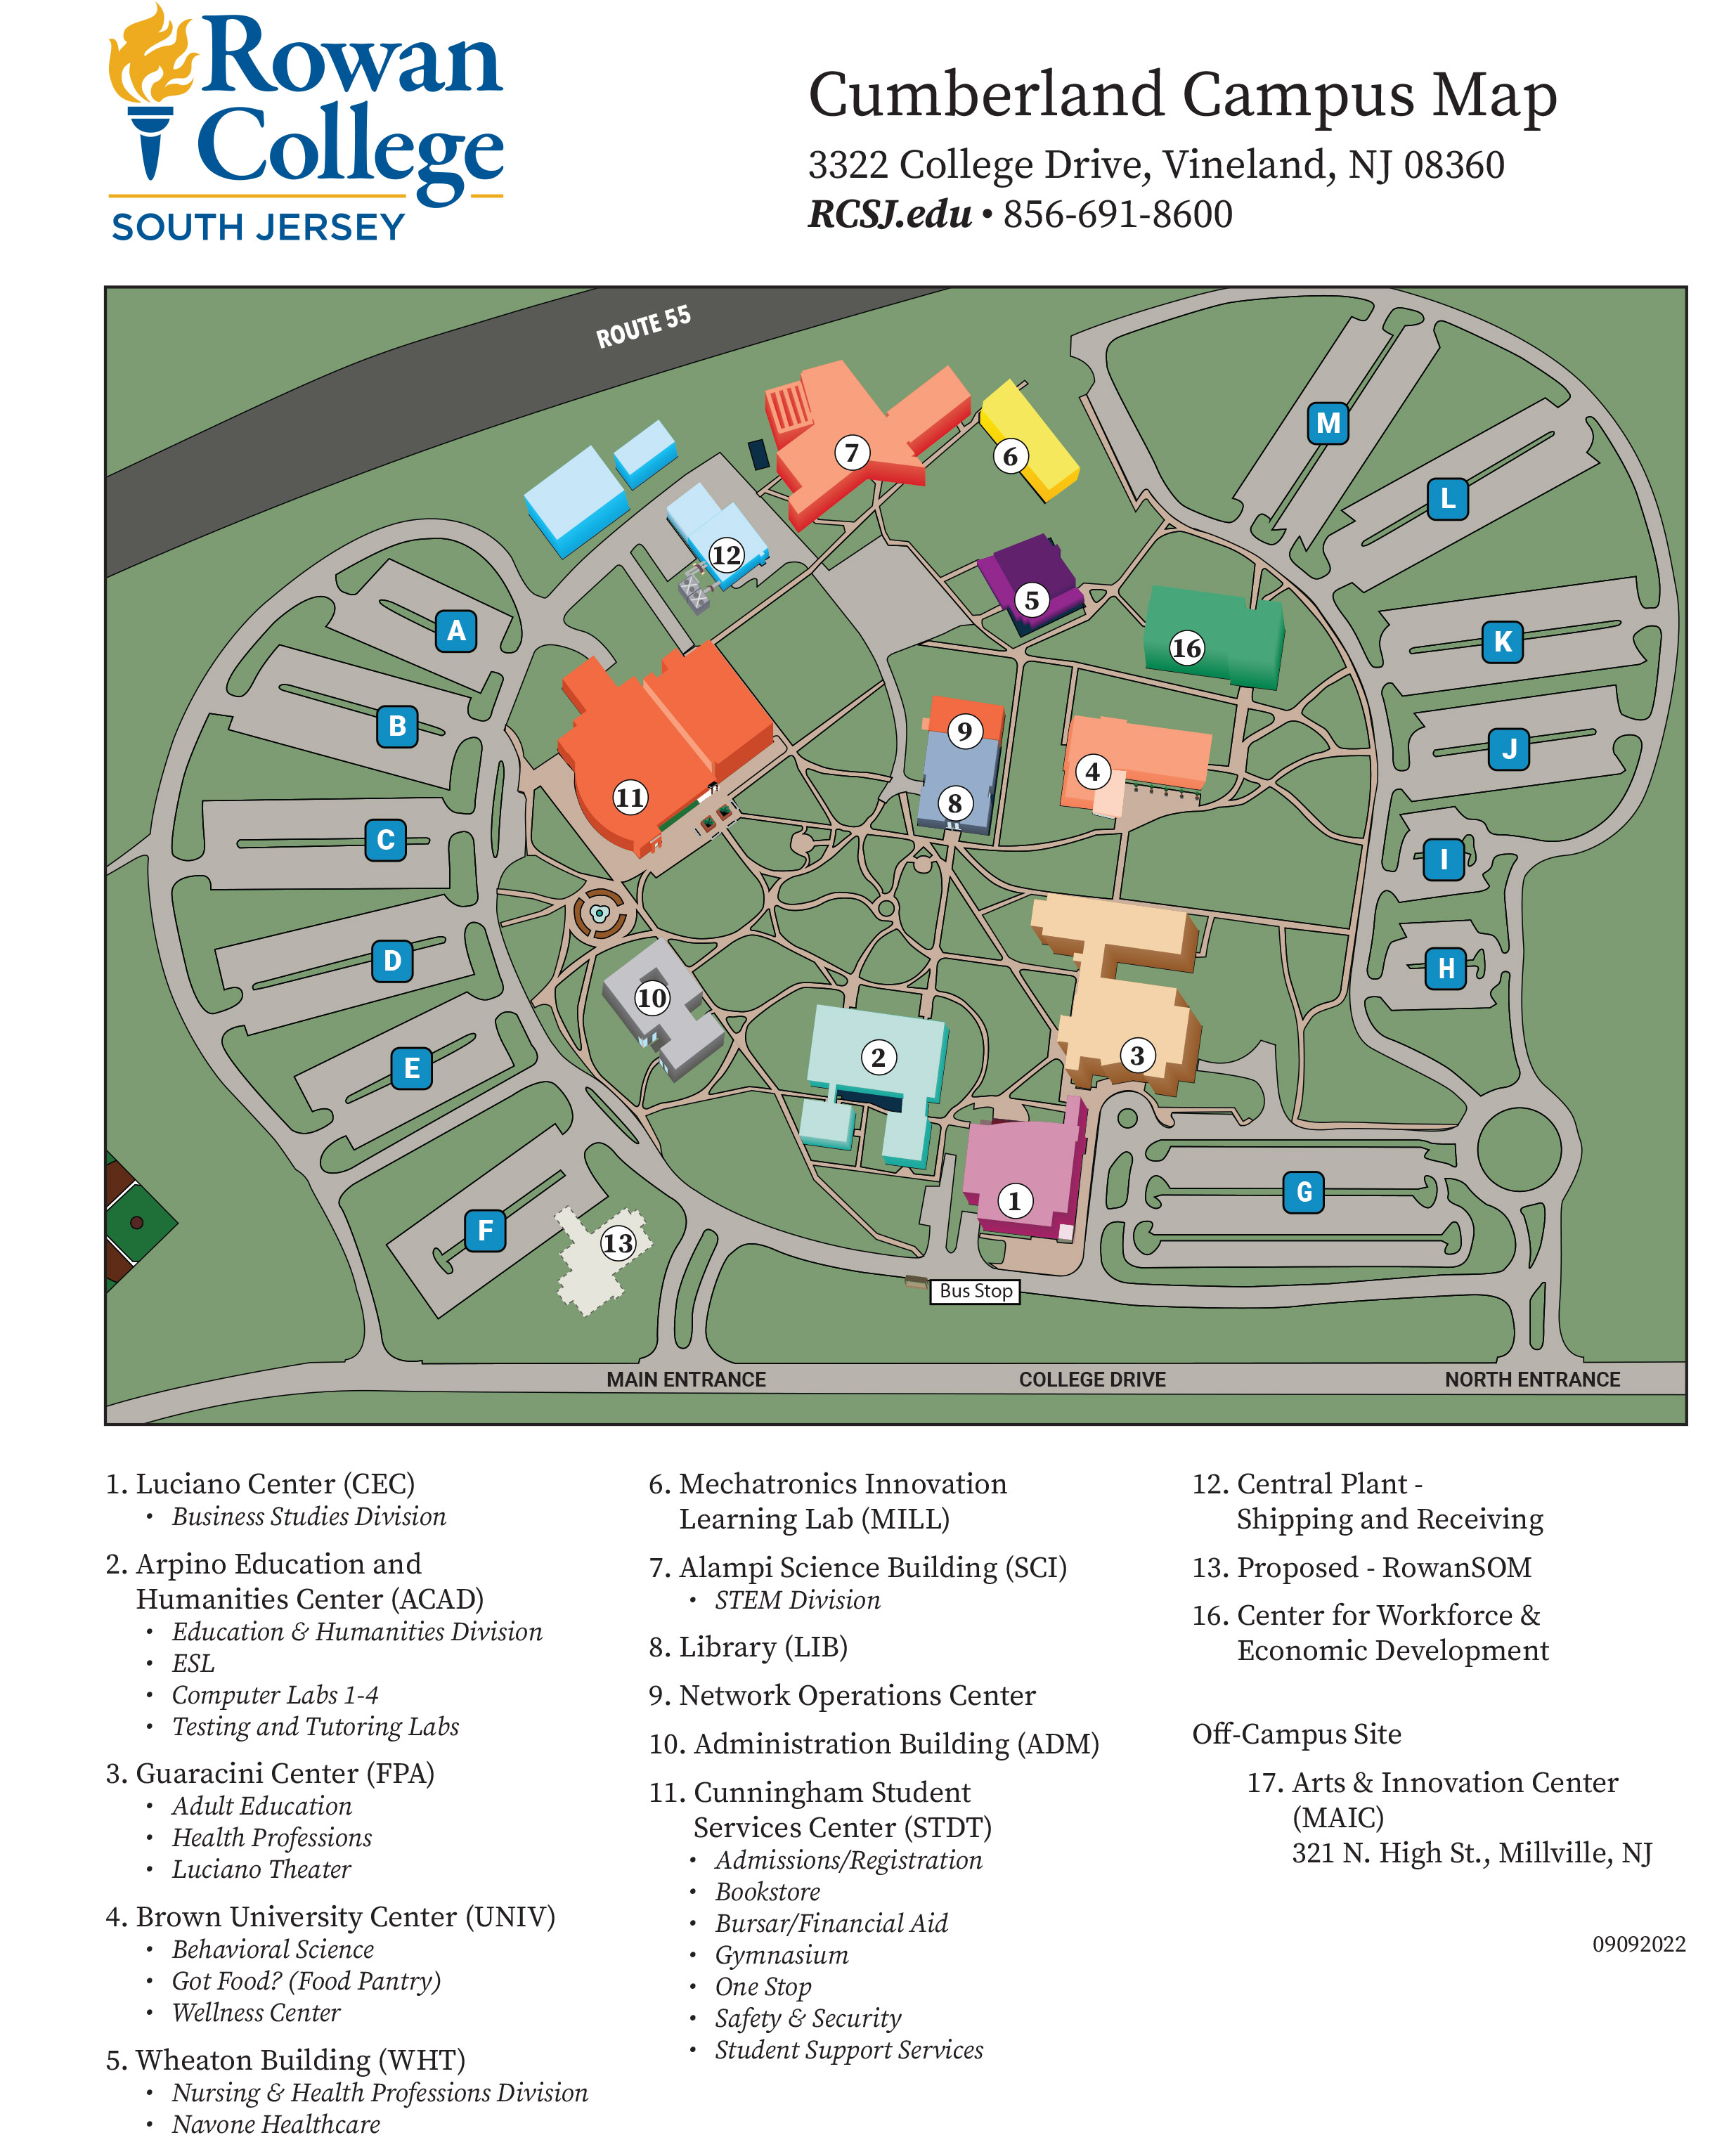 Map of the Cumberland Campus with building descriptions